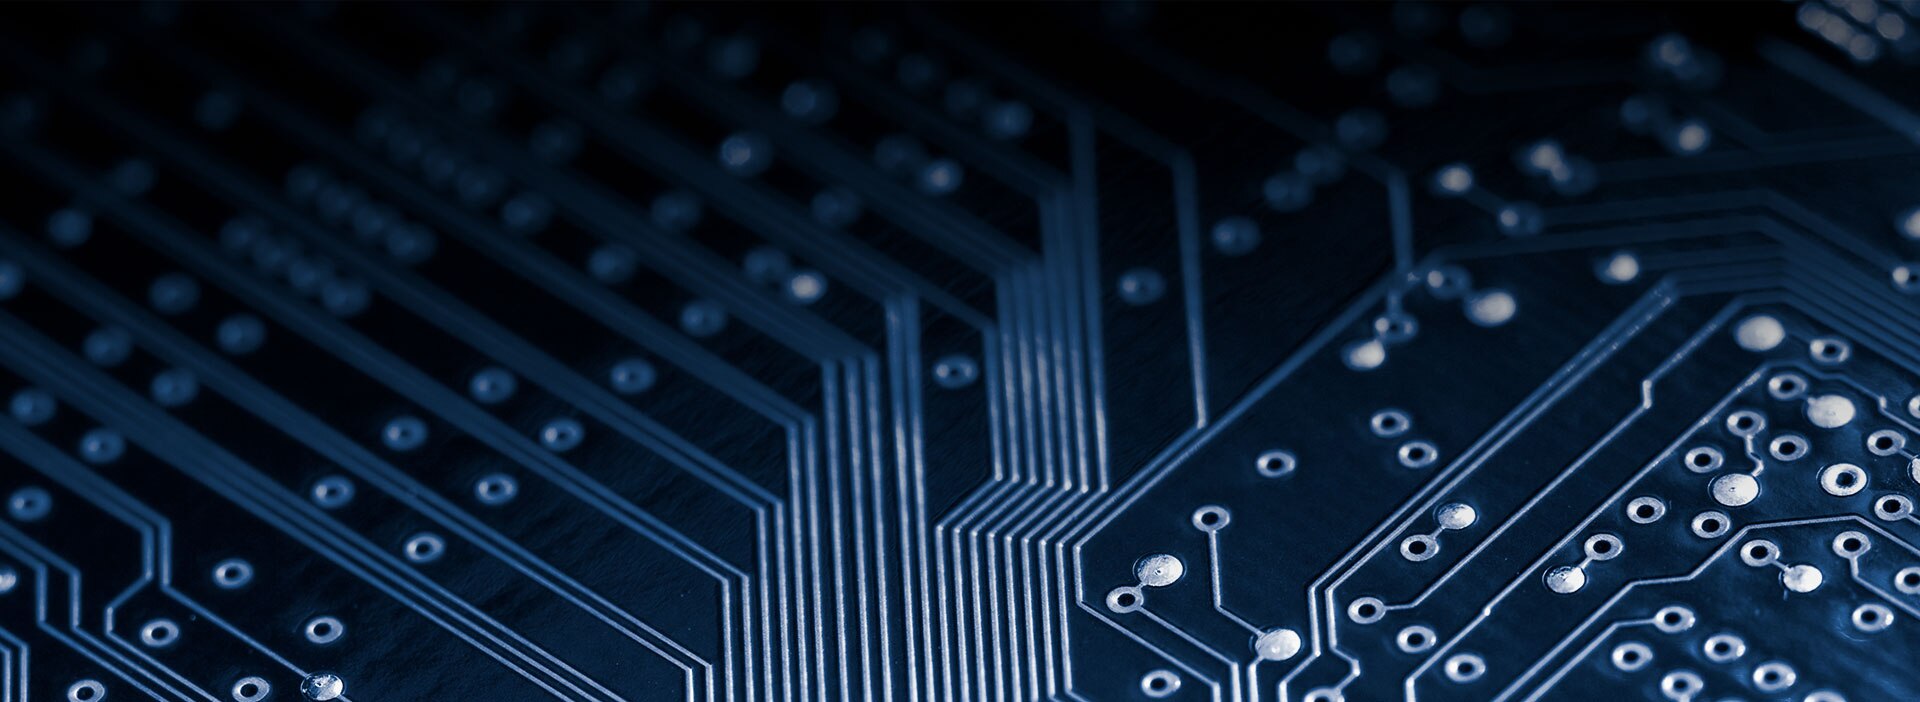 Close up of a Circuit Board.